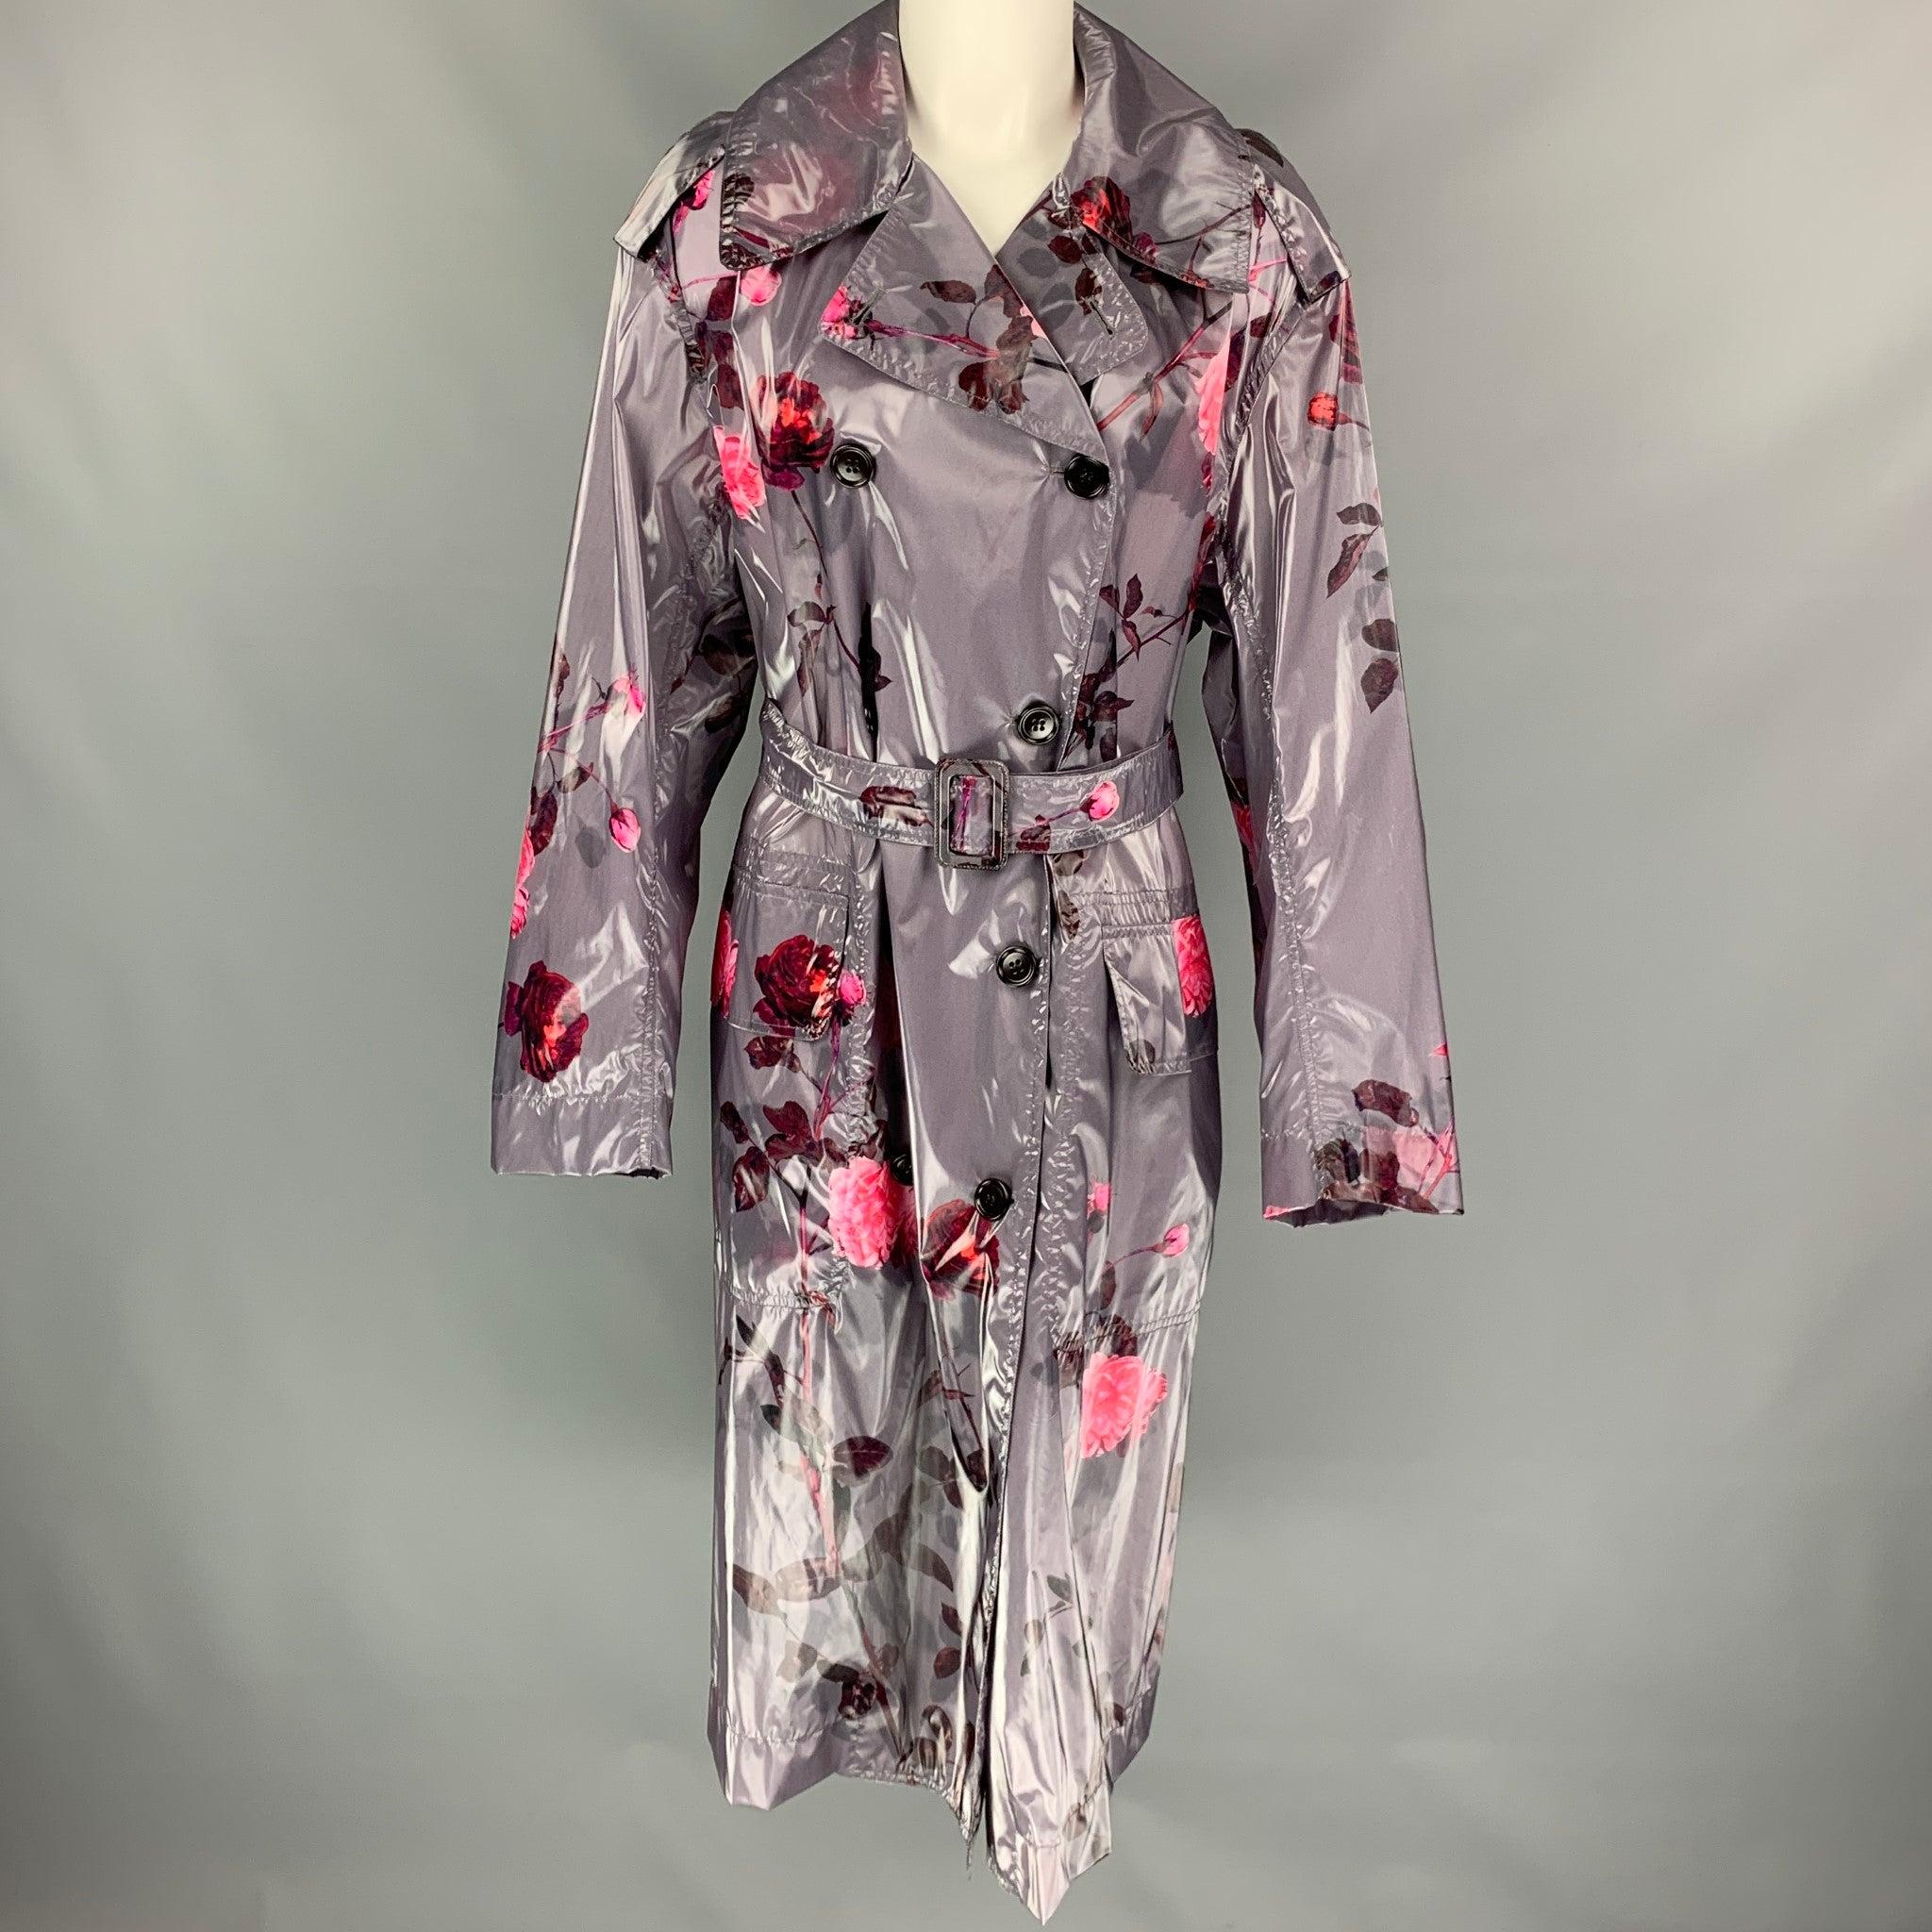 DRIES VAN NOTEN trench coat comes in a grey & pink floral polyurethane blend featuring a belted style, oversized fit, flap pockets, and a double breasted closure. Made in Poland.
New With Tags.
 

Marked:  XS 

Measurements: 
 
Shoulder: 20 inches